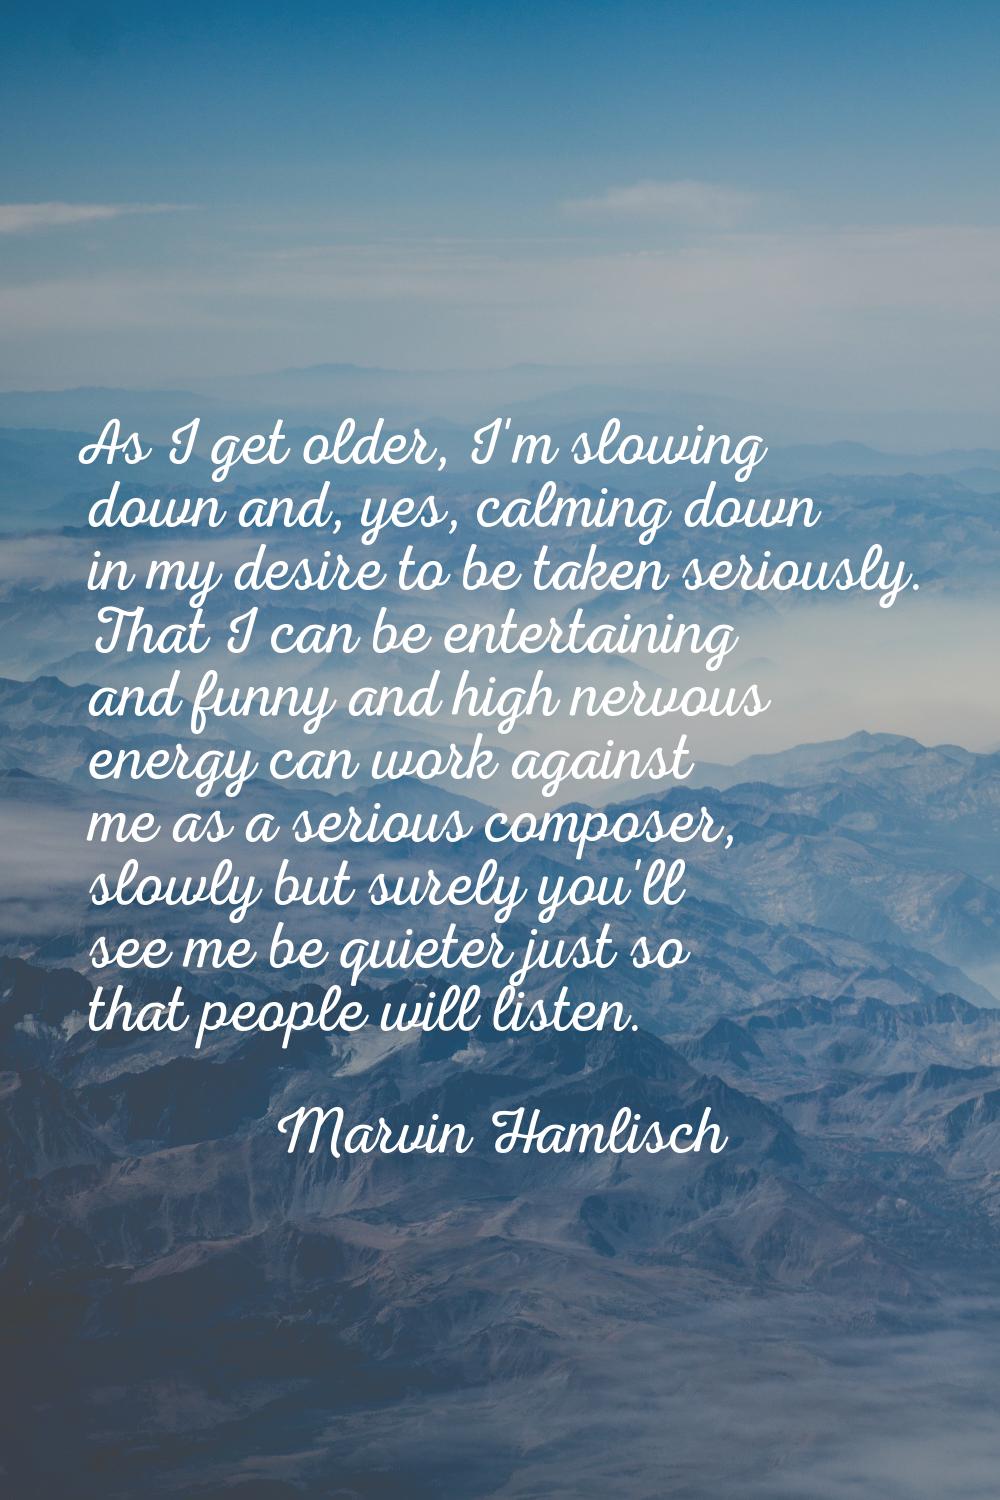 As I get older, I'm slowing down and, yes, calming down in my desire to be taken seriously. That I 